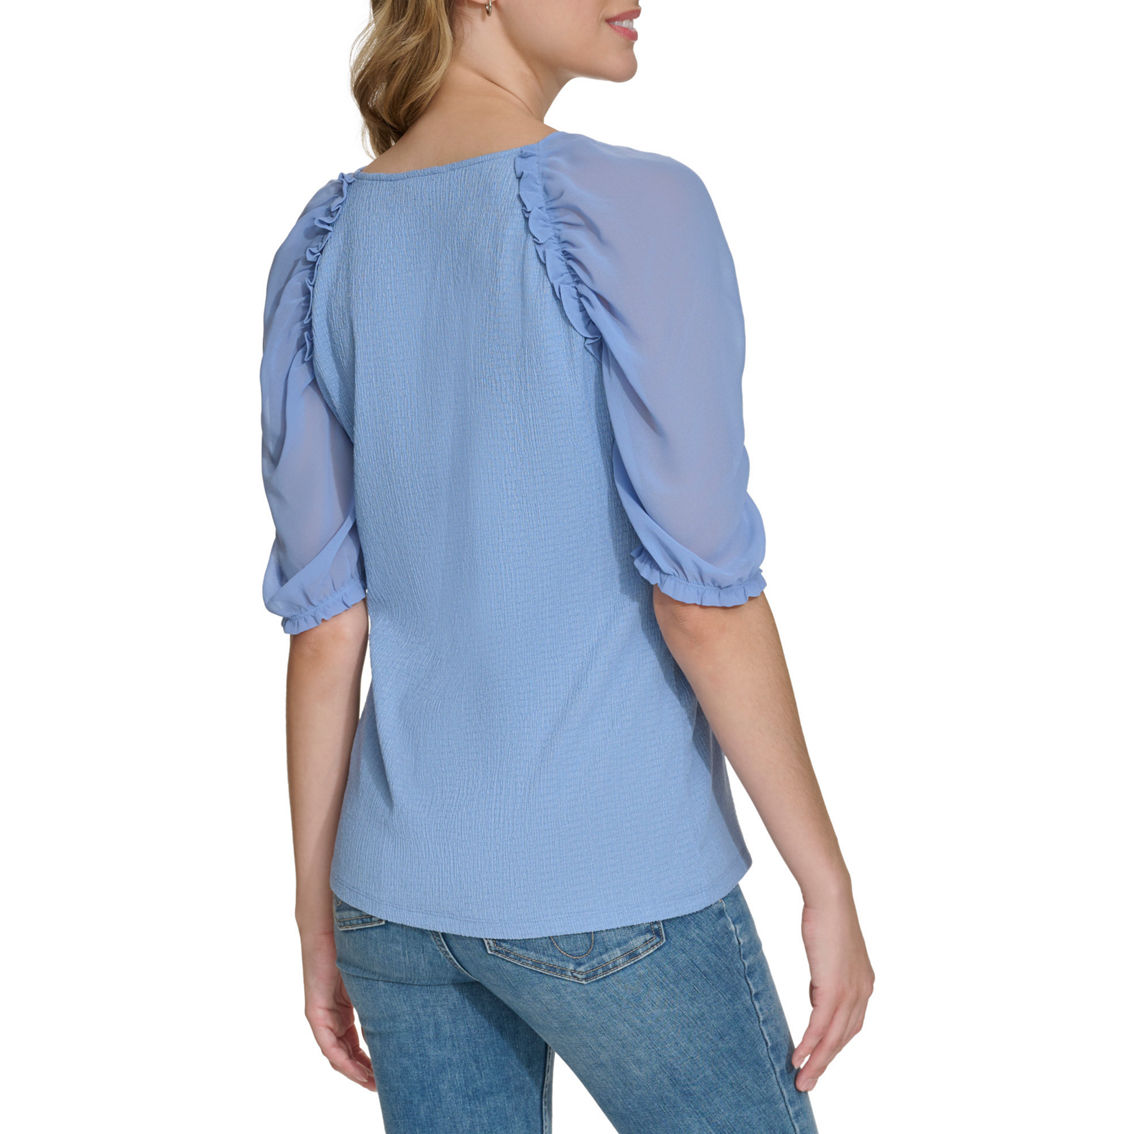 Calvin Klein Cinched Elbow Sleeve Top - Image 2 of 5